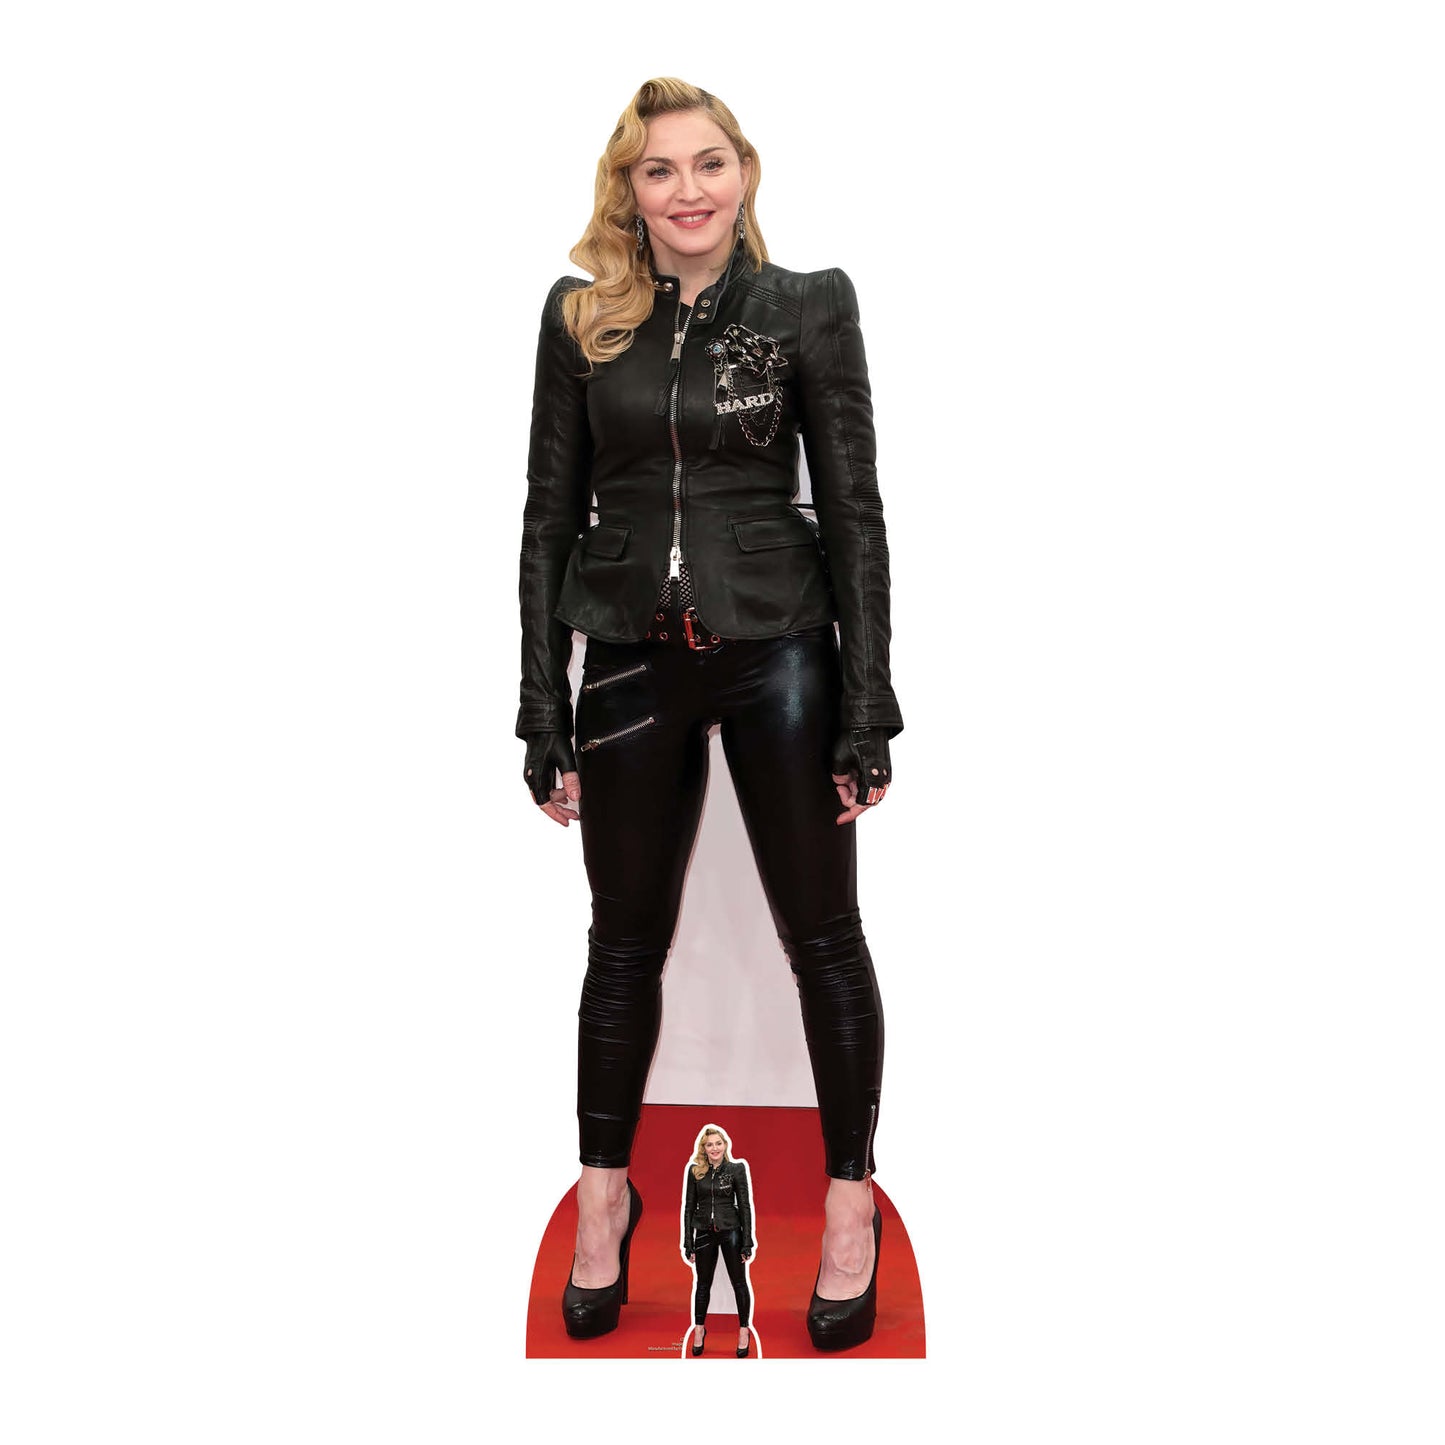 CS1030 Madonna Height 180cm Lifesize Cardboard Cut Out With Mini